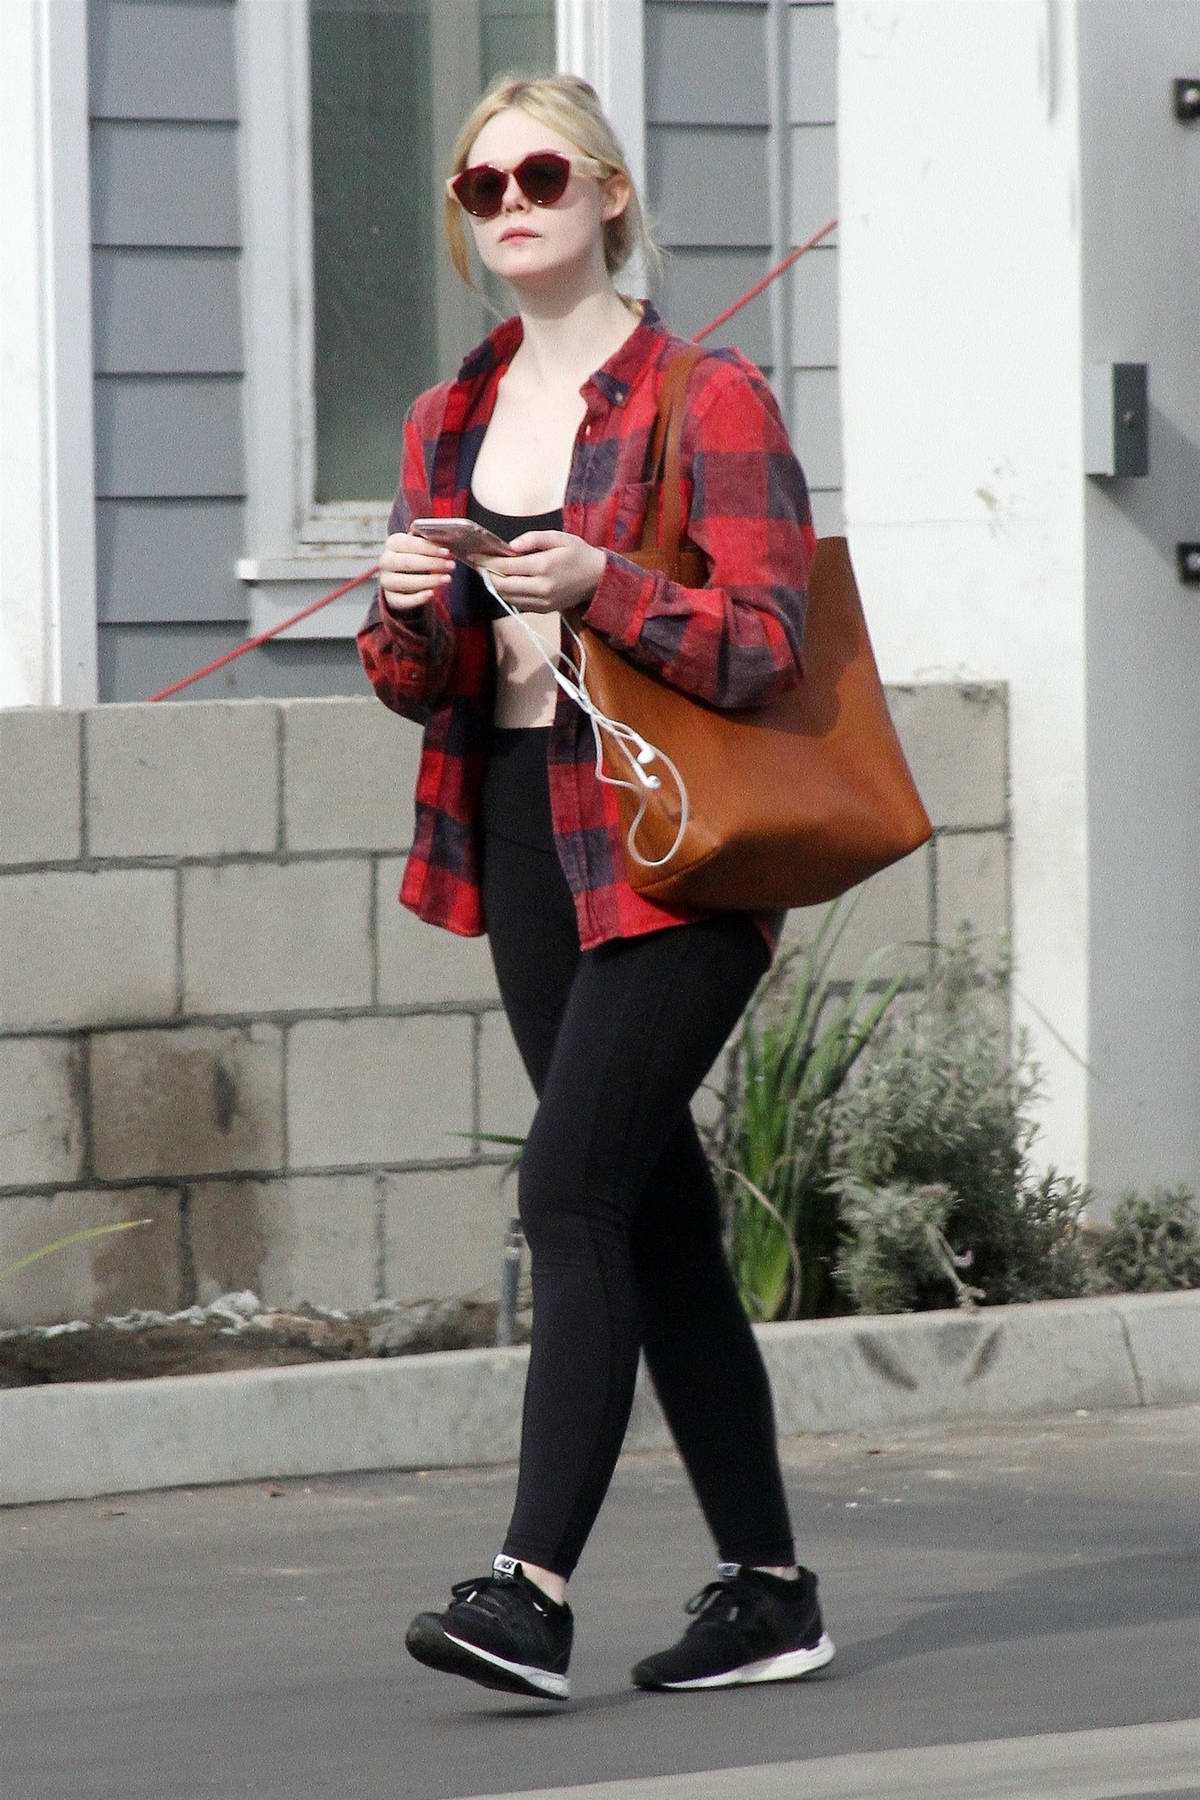 elle fanning wore red flannel shirt over a black sports bra with black leggings as she heads out 